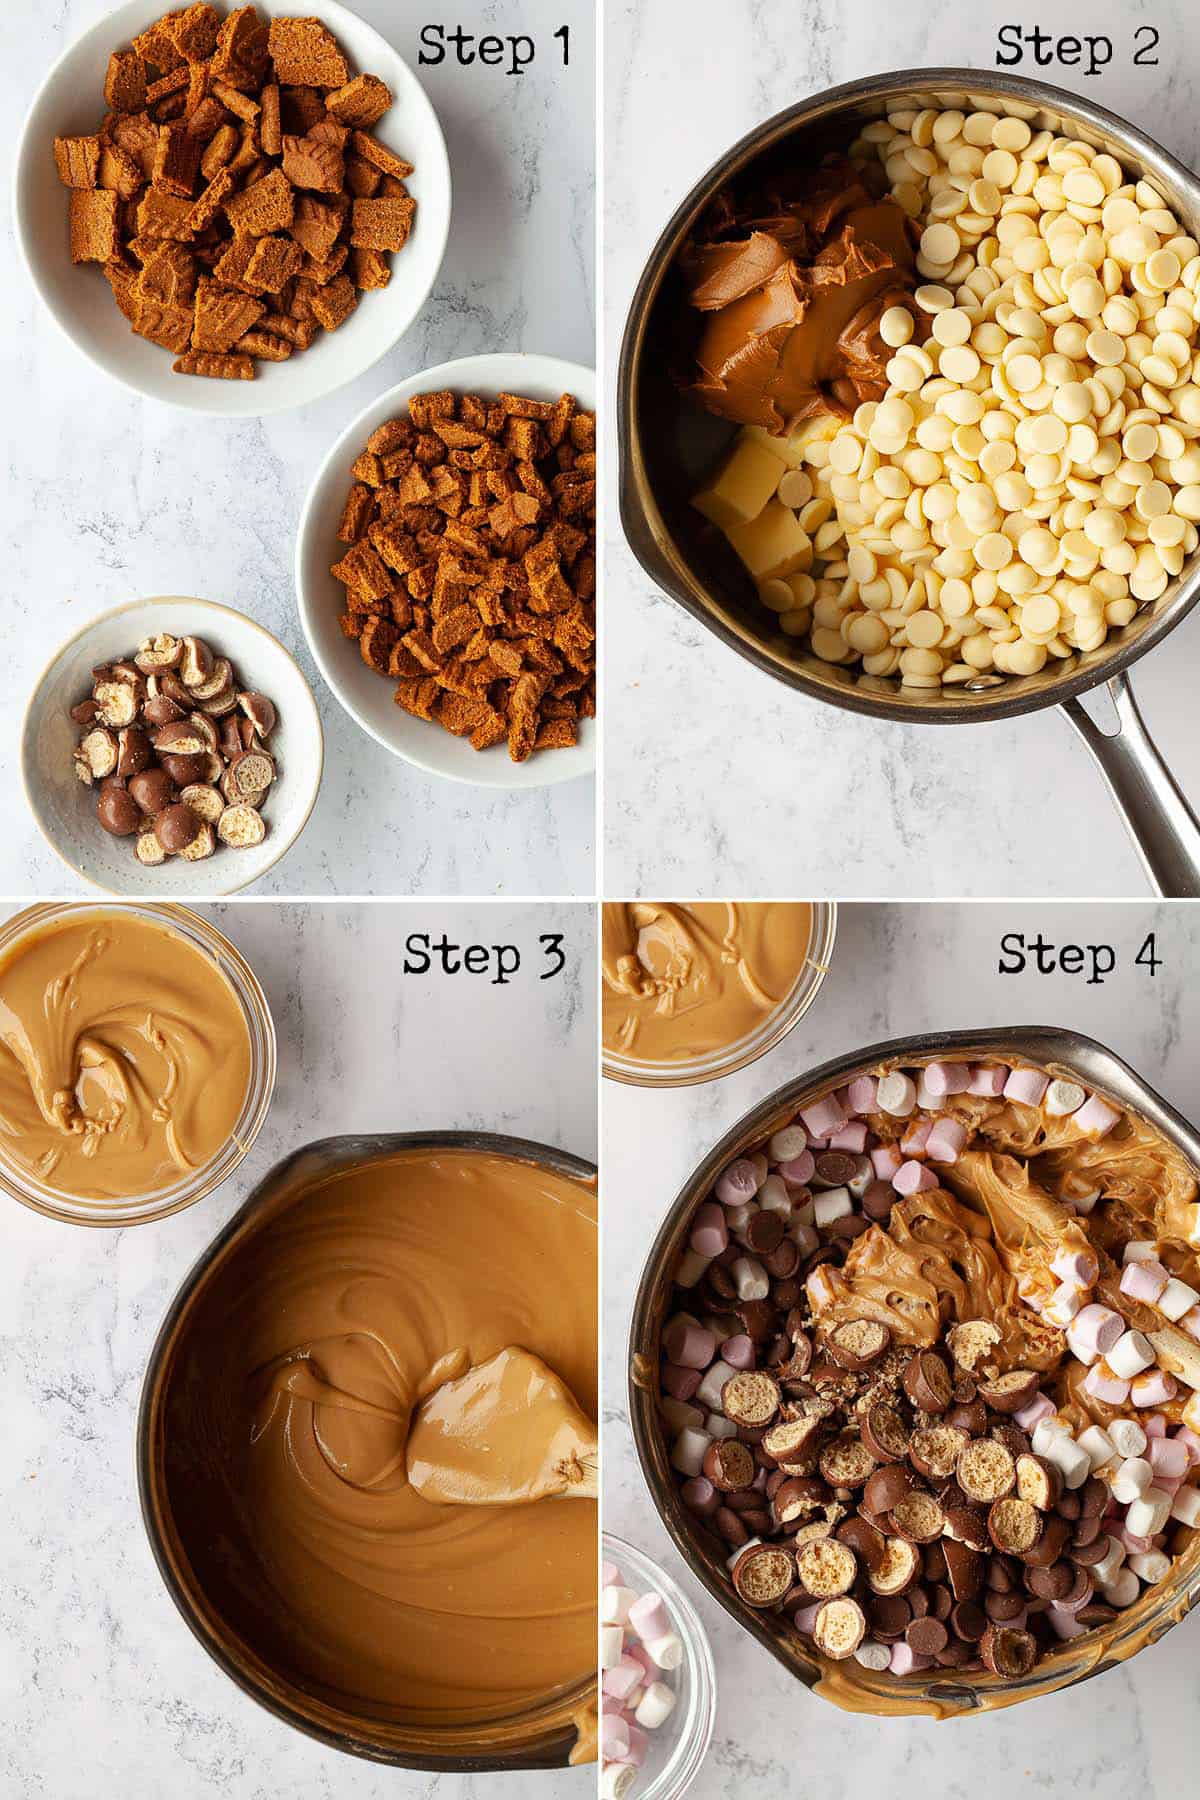 Collage of images showing a chocolate and cookie butter no-bake dessert being made.